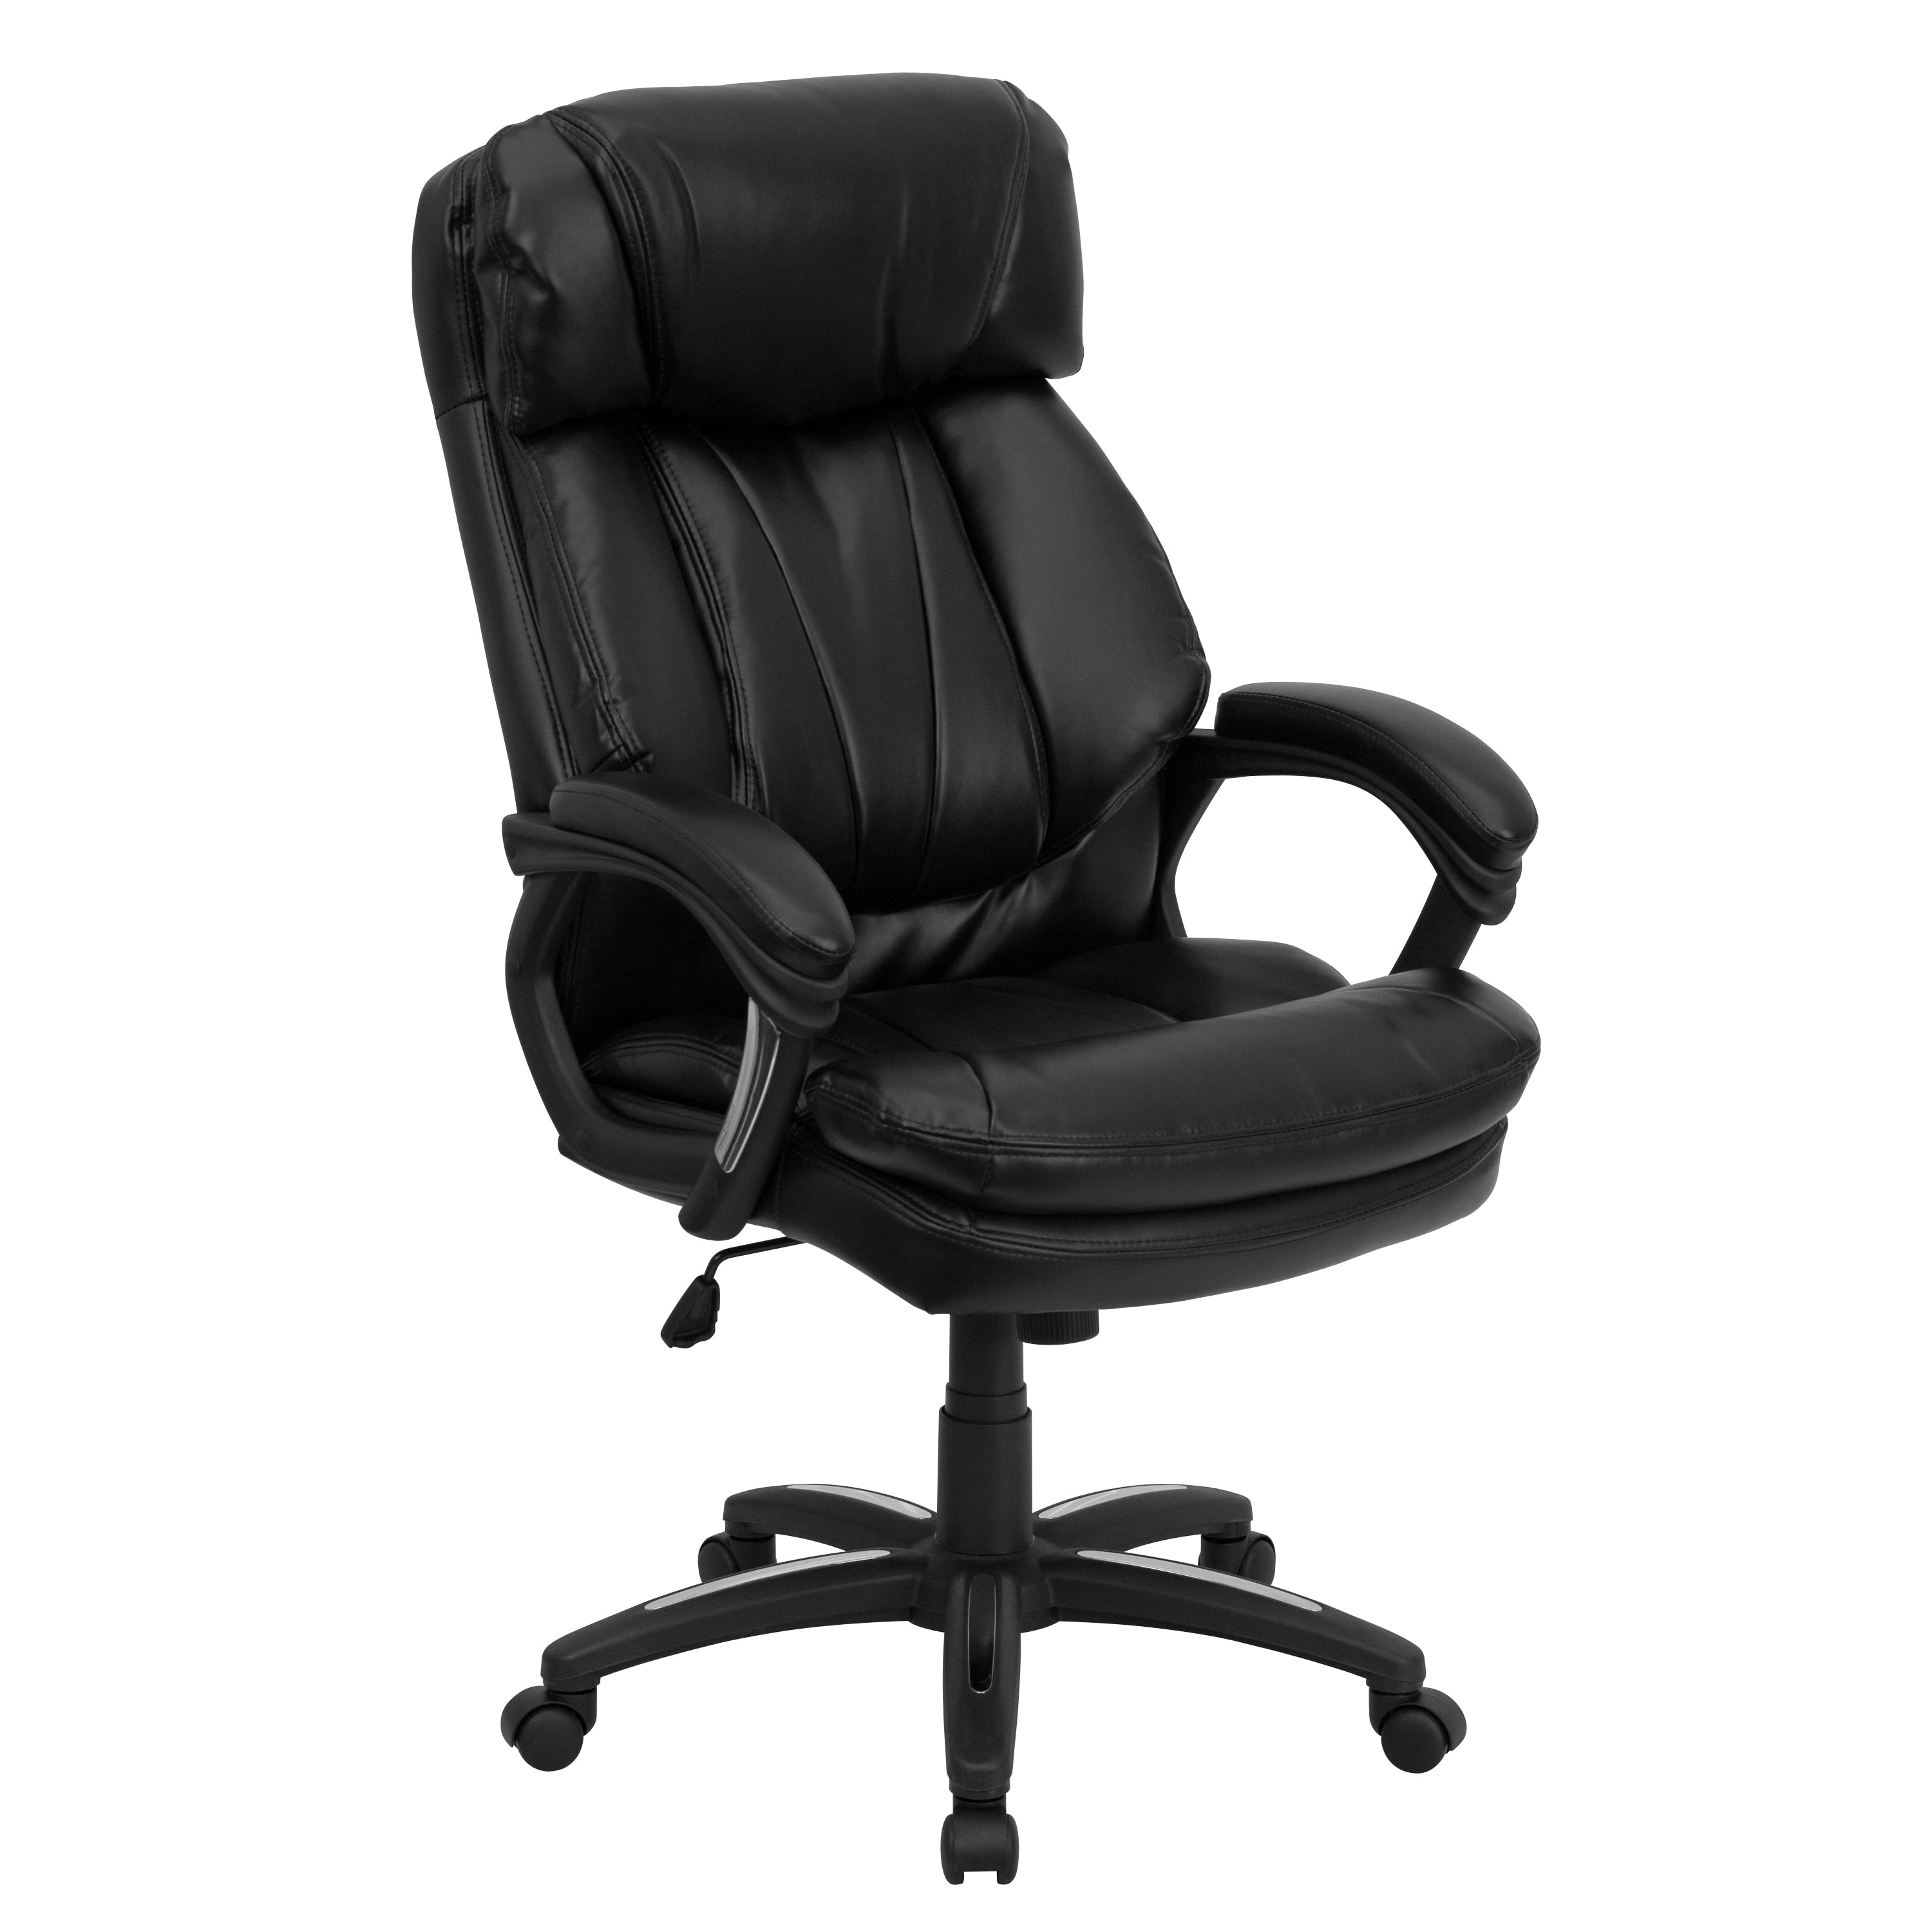 High Back LeatherSoft Executive Swivel Ergonomic Office Chair with Plush Headrest, Extensive Padding and Arms-Office Chair-Flash Furniture-Wall2Wall Furnishings